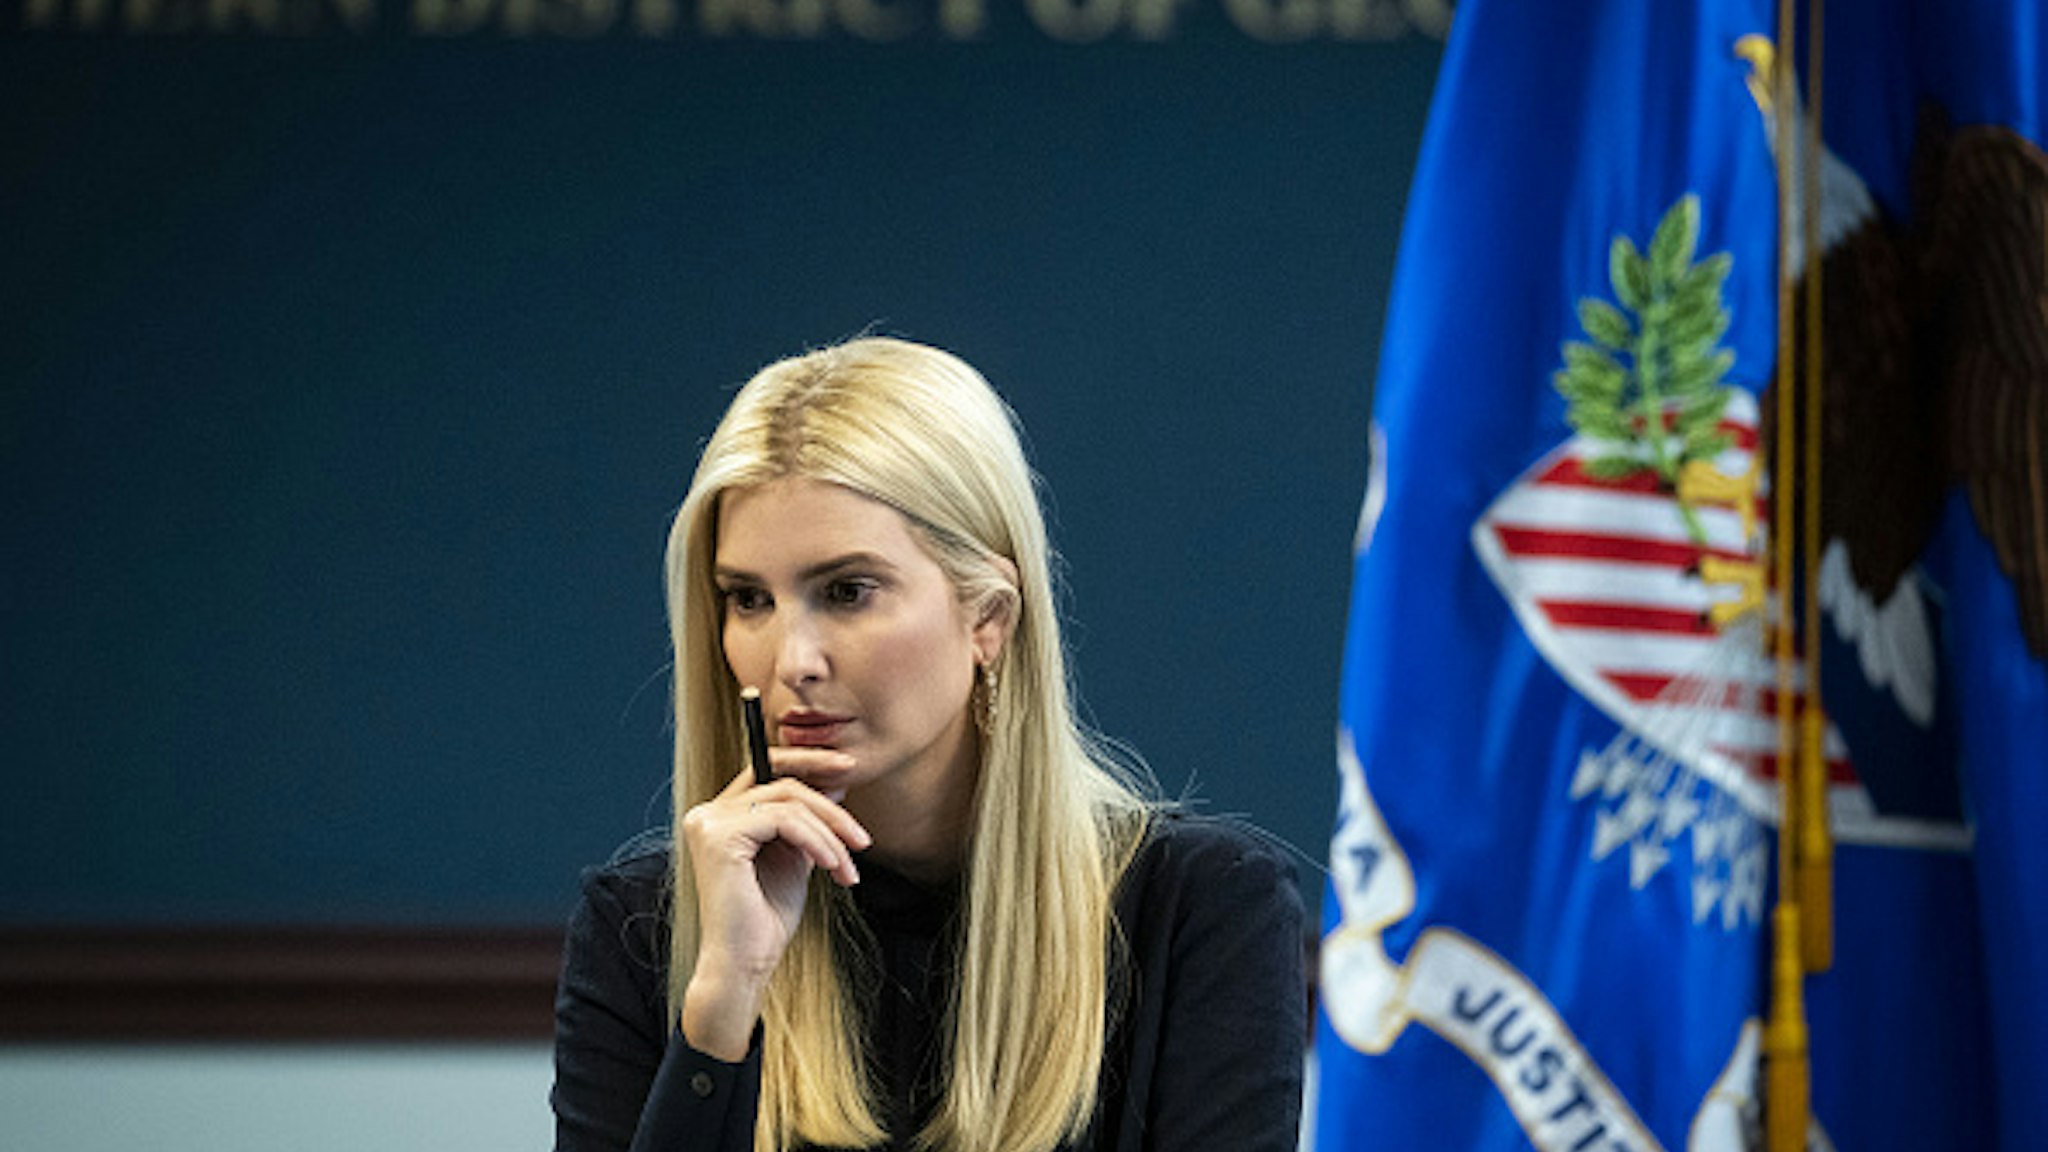 Ivanka Trump, assistant to U.S. President Donald Trump, listens during a roundtable discussion with William Barr, U.S. attorney general, federal, state, and local officials, not pictured, at the U.S. Attorney's Office in Atlanta, Georgia, U.S., on Monday, Sept. 21, 2020. Barr said the federal government is awarding more than $100 million in grants to target human trafficking. The money will go to task forces combatting human trafficking, to victim services and victim housing, reports the Associated Press.